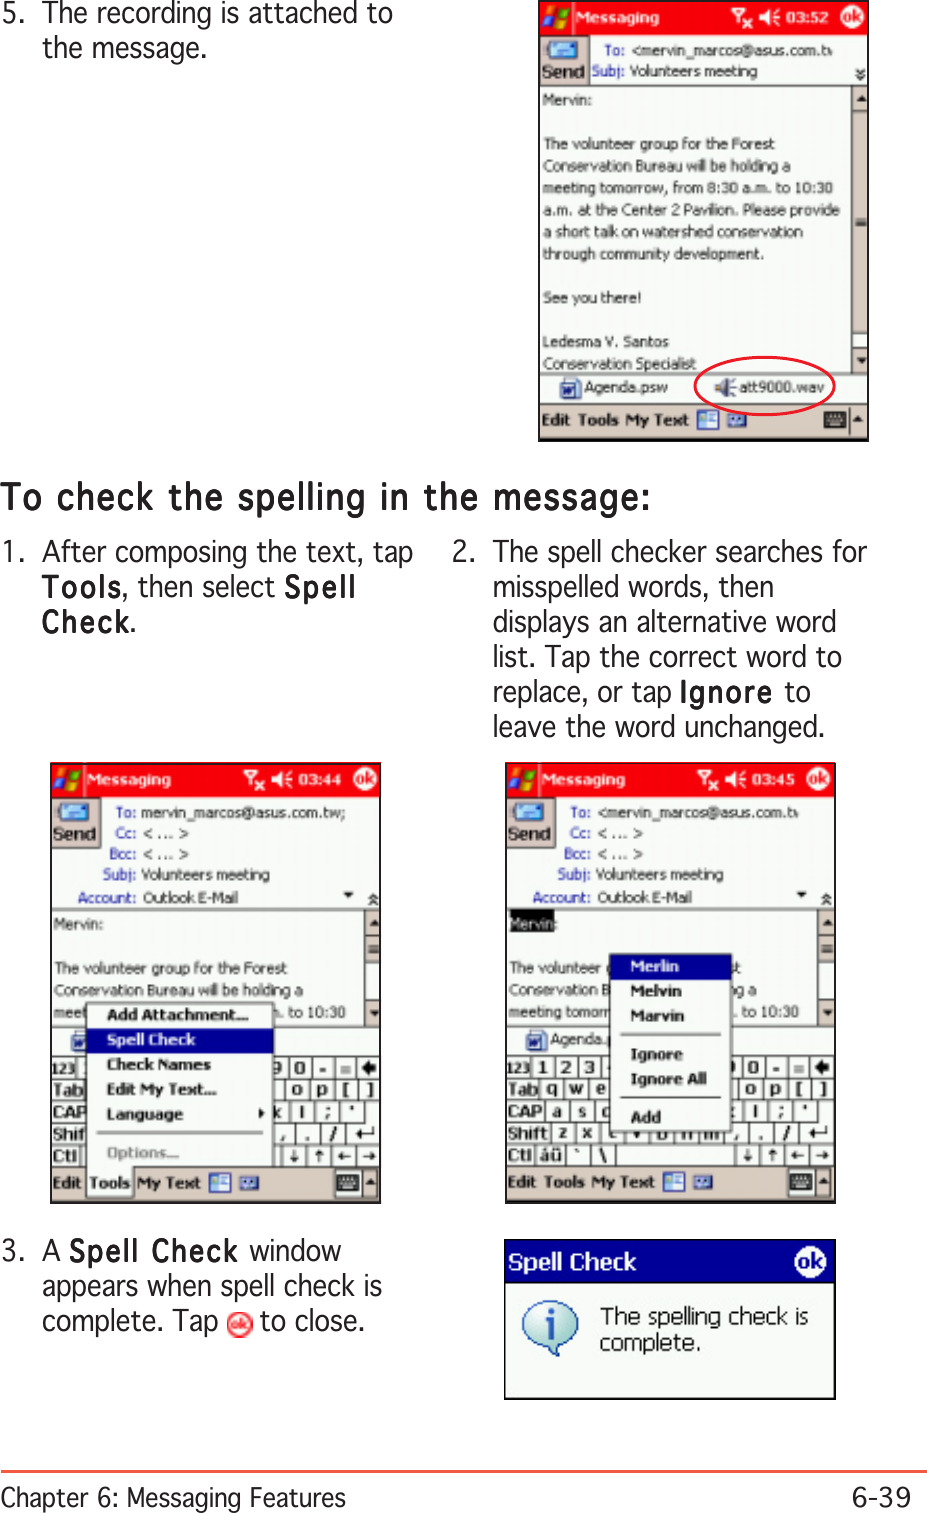 Chapter 6: Messaging Features6-395. The recording is attached tothe message.To check the spelling in the message:To check the spelling in the message:To check the spelling in the message:To check the spelling in the message:To check the spelling in the message:2. The spell checker searches formisspelled words, thendisplays an alternative wordlist. Tap the correct word toreplace, or tap IgnoreIgnoreIgnoreIgnoreIgnore toleave the word unchanged.3. A Spell Check Spell Check Spell Check Spell Check Spell Check windowappears when spell check iscomplete. Tap   to close.1. After composing the text, tapToolsToolsToolsToolsTo o ls, then select SpellSpellSpellSpellSpellCheckCheckCheckCheckCheck.